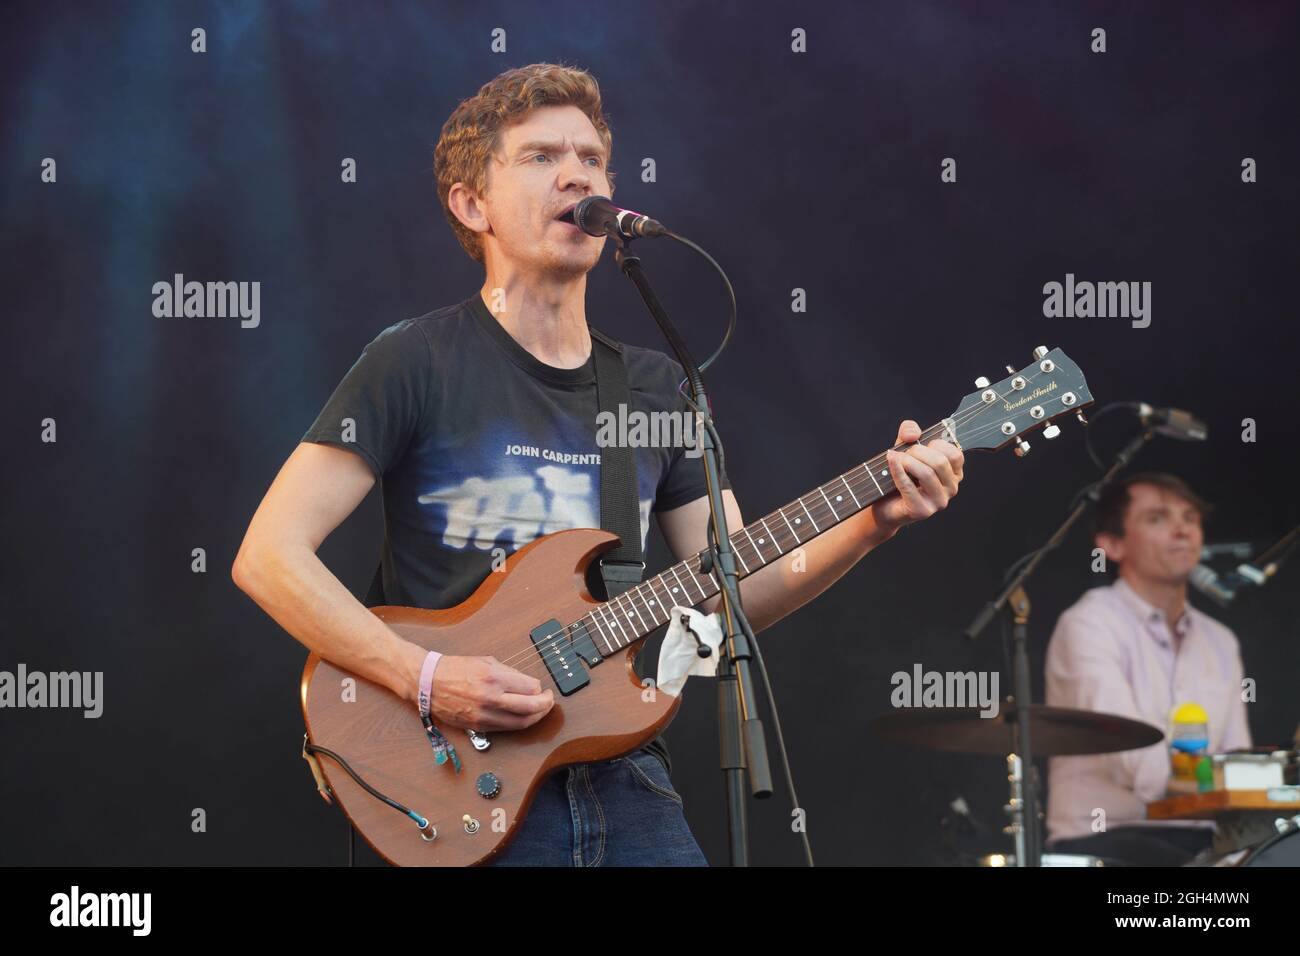 Dorset, UK. September 5th, 2021. Field Music performing at the 2021 End of the Road Festival in Larmer Tree Gardens in Dorset. Photo: Richard Gray/Alamy Stock Photo